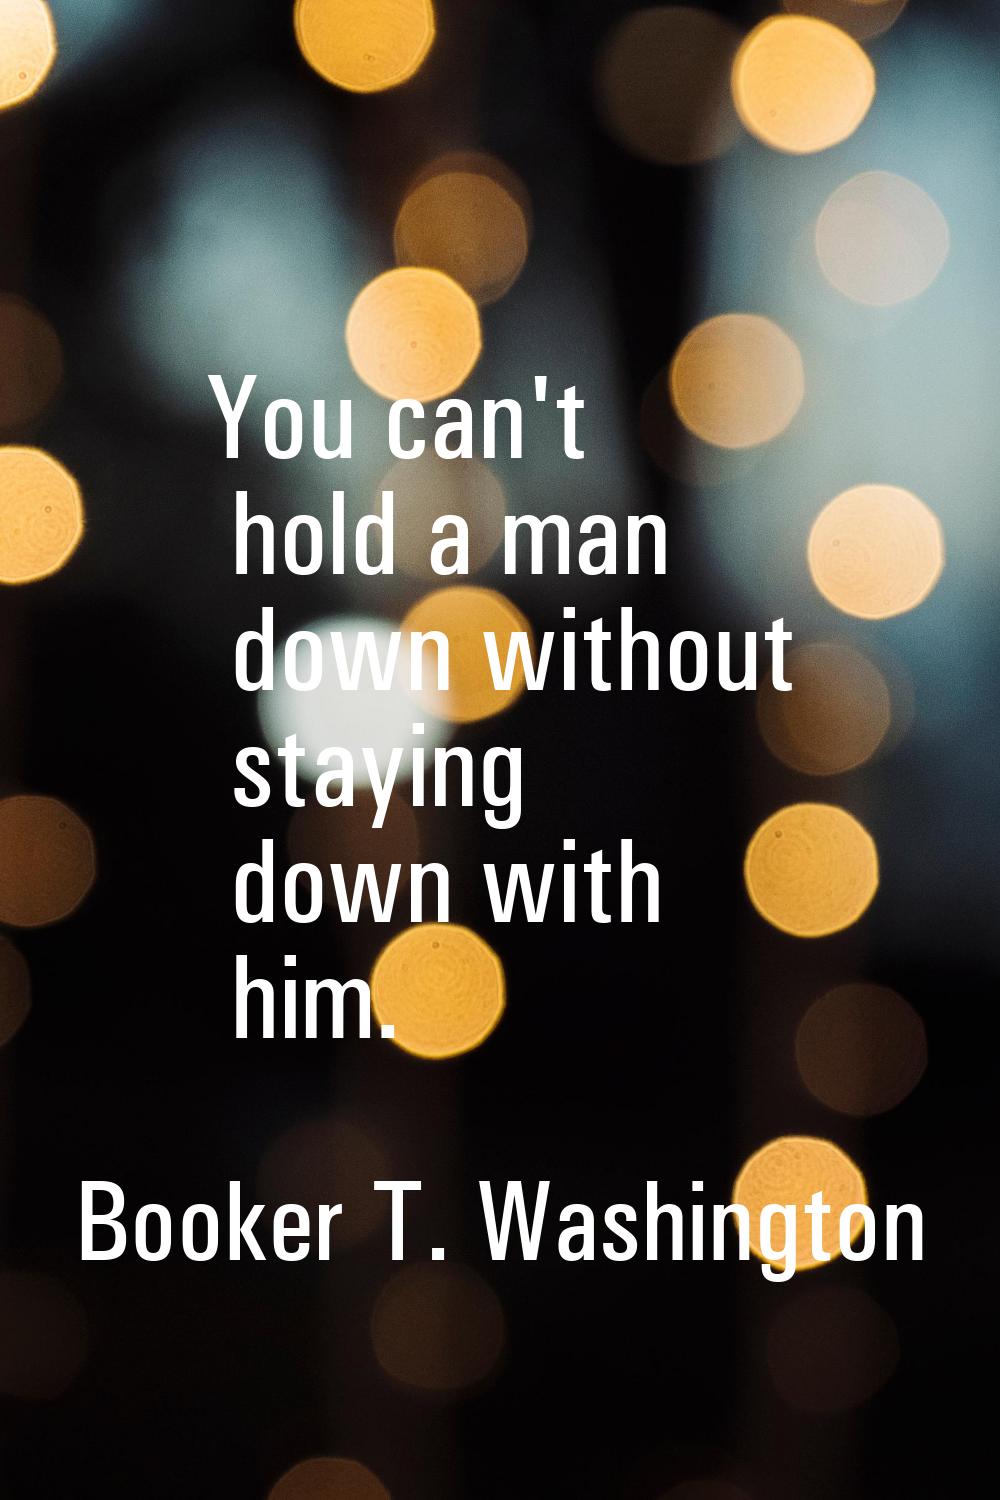 You can't hold a man down without staying down with him.